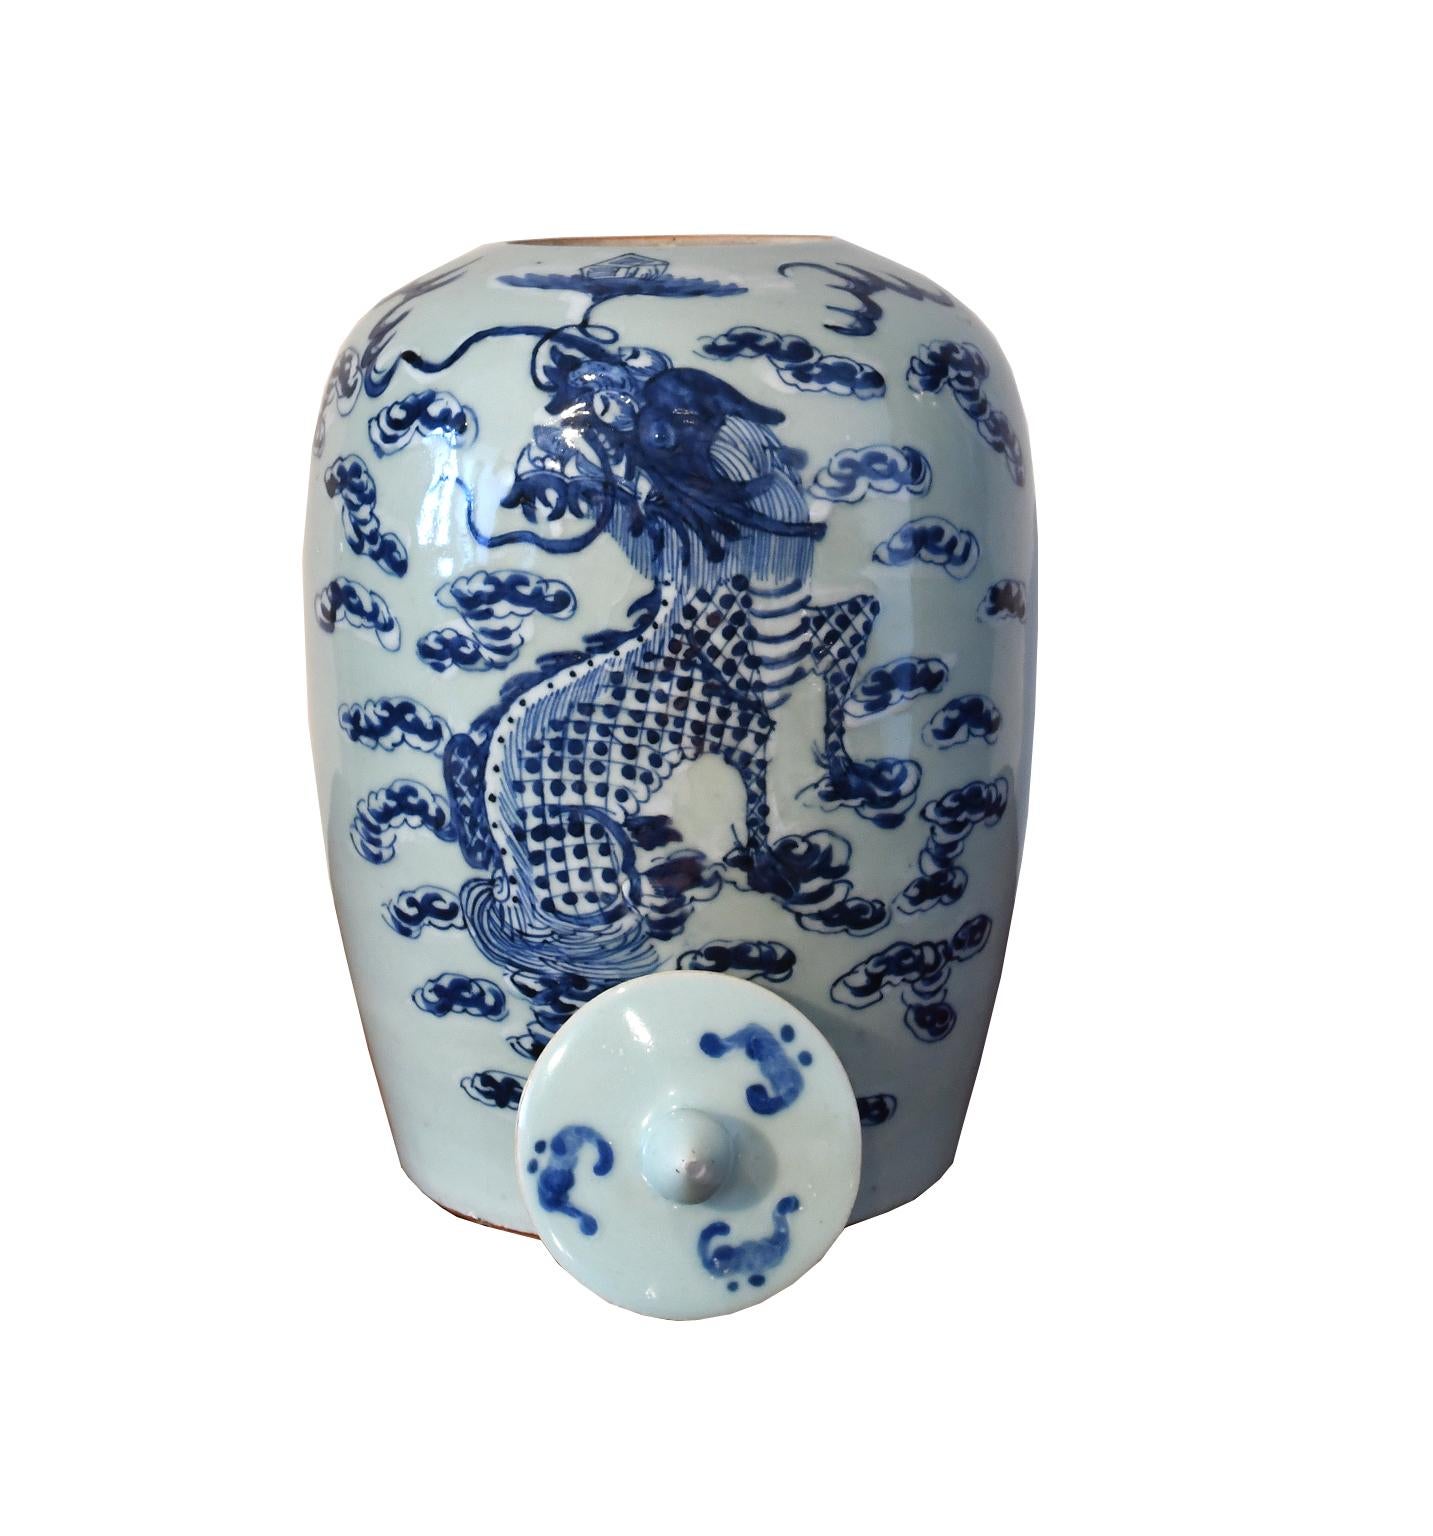 A very beautiful Chinese porcelain baluster-shaped jar with lid and knob, painted in underglaze blue crackle with hand-painted cobalt blue and white decorations depicting a two-horned, five-clawed dragon amid clouds, who is carrying into the heavens